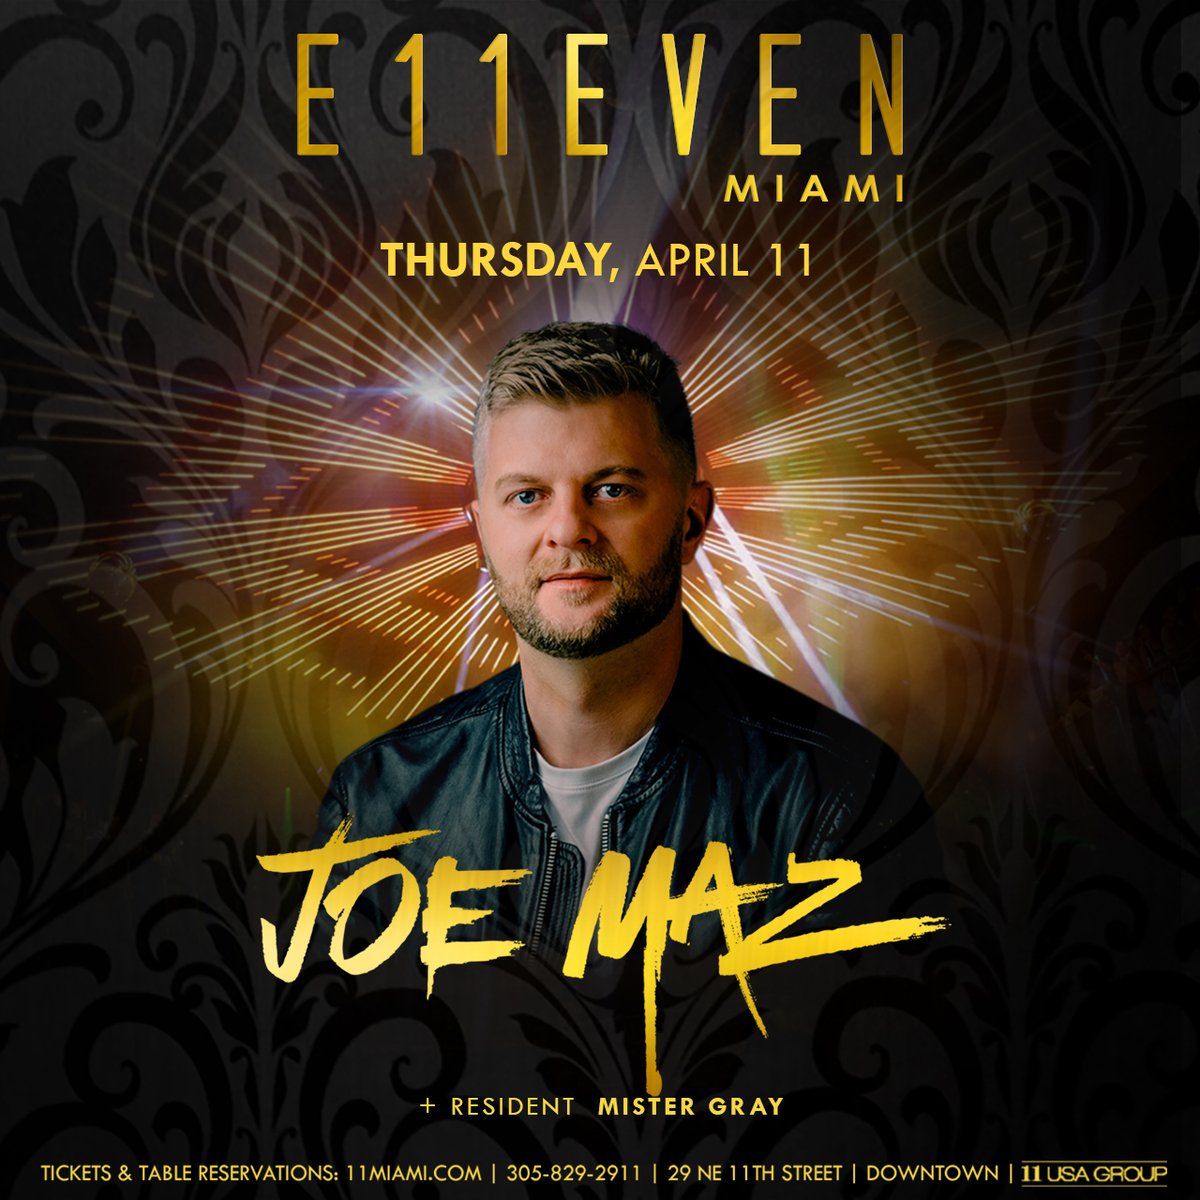 Embrace the week ahead with @JoeMaz at #11miami this Thursday, April 11th! ❤️‍🔥 Tickets & Tables link in bio | 11miami.com #E11EVEN #Miami